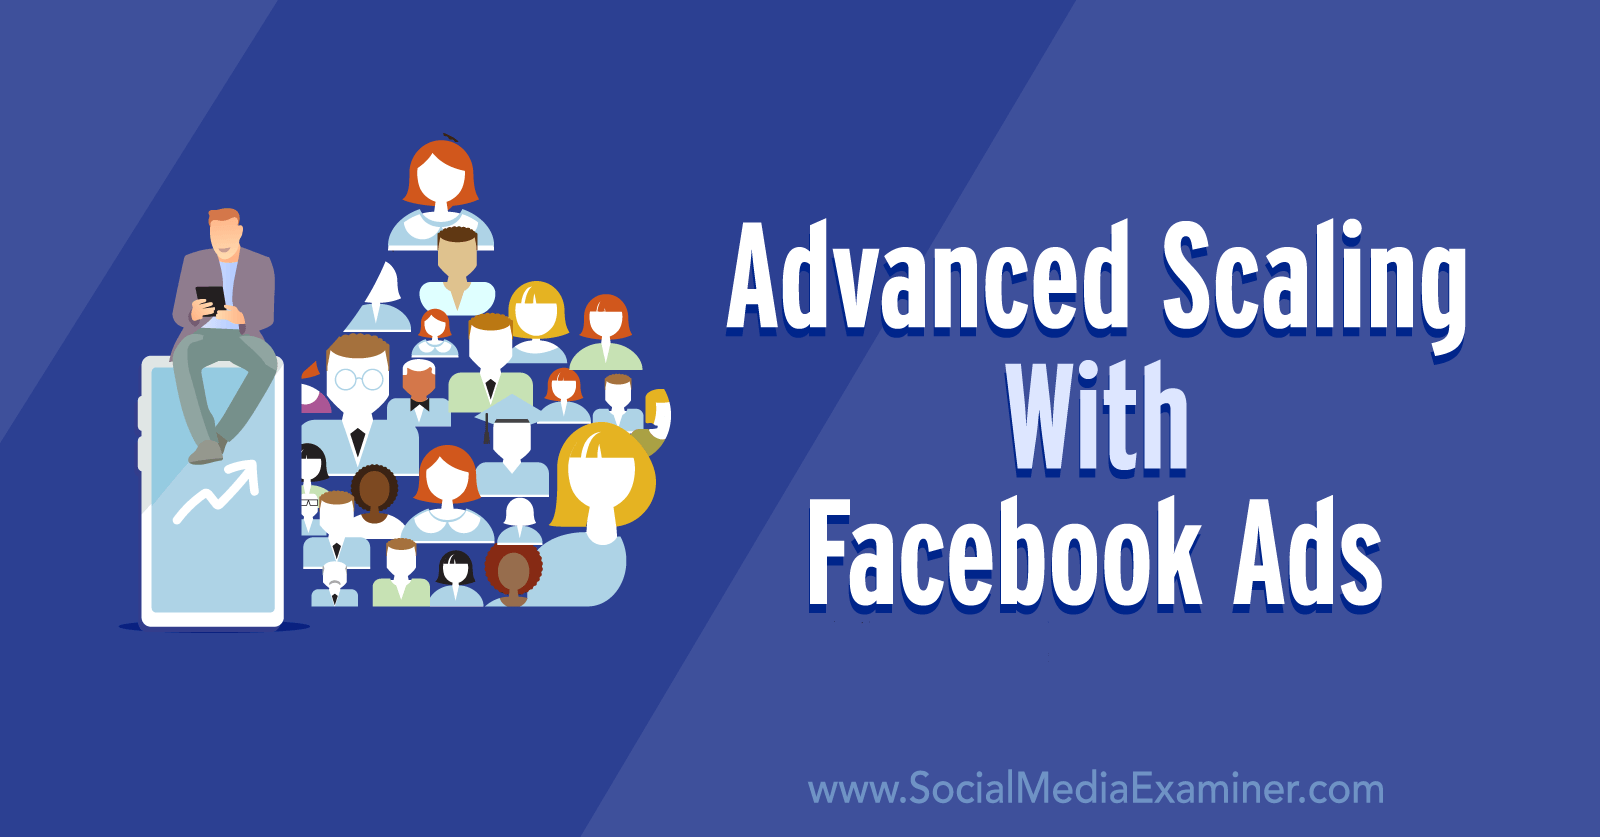 Advanced Scaling With Facebook Ads by Social Media Examiner